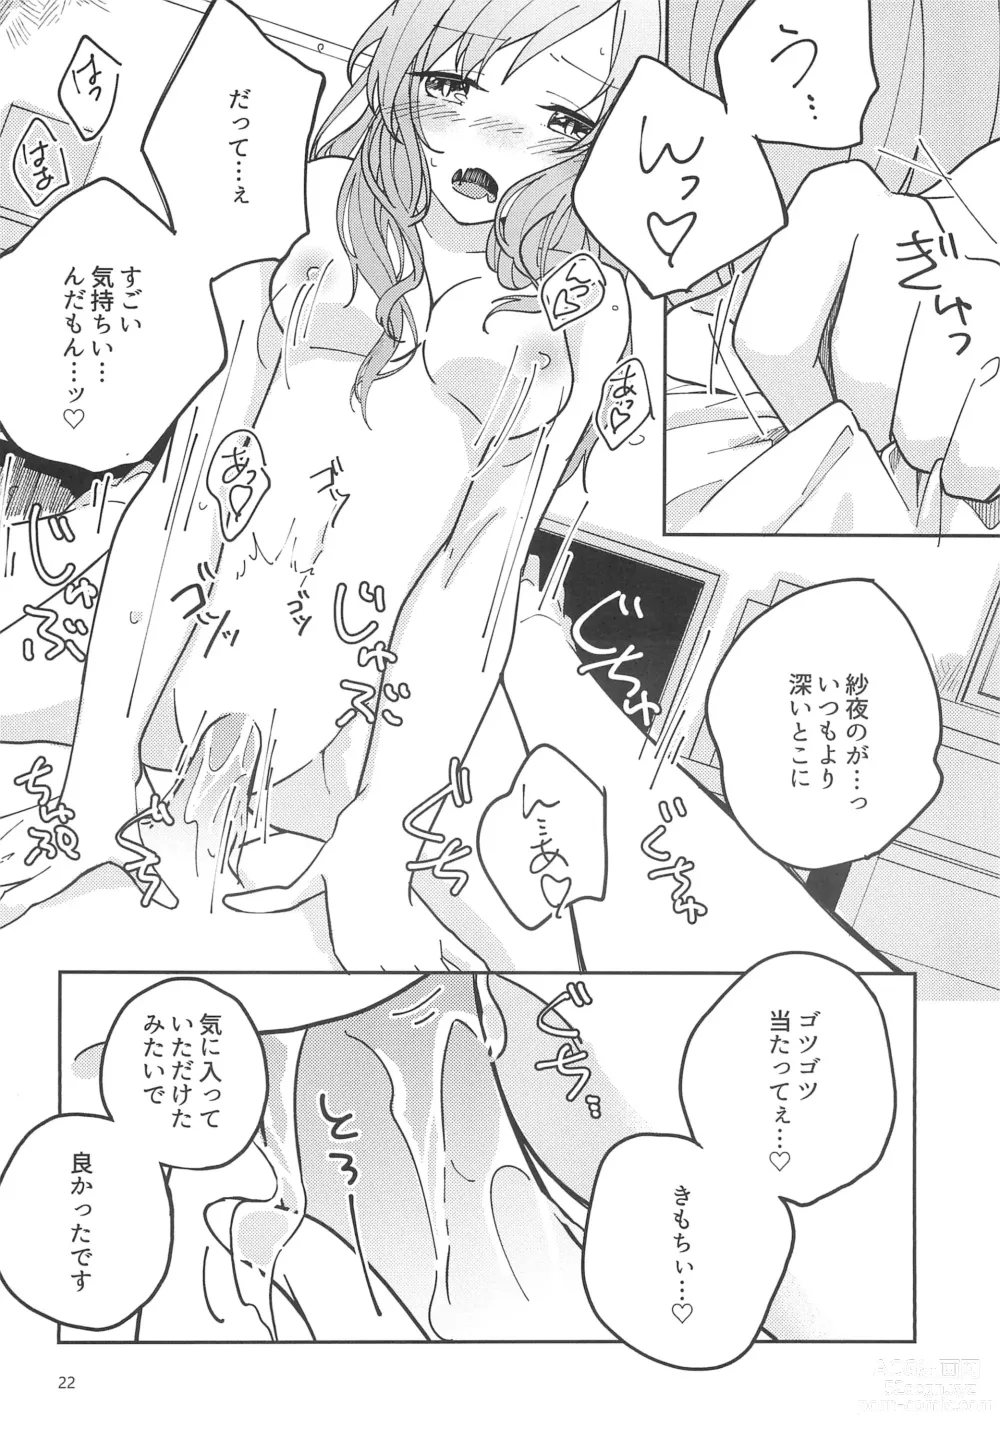 Page 24 of doujinshi I’m crazy about you.